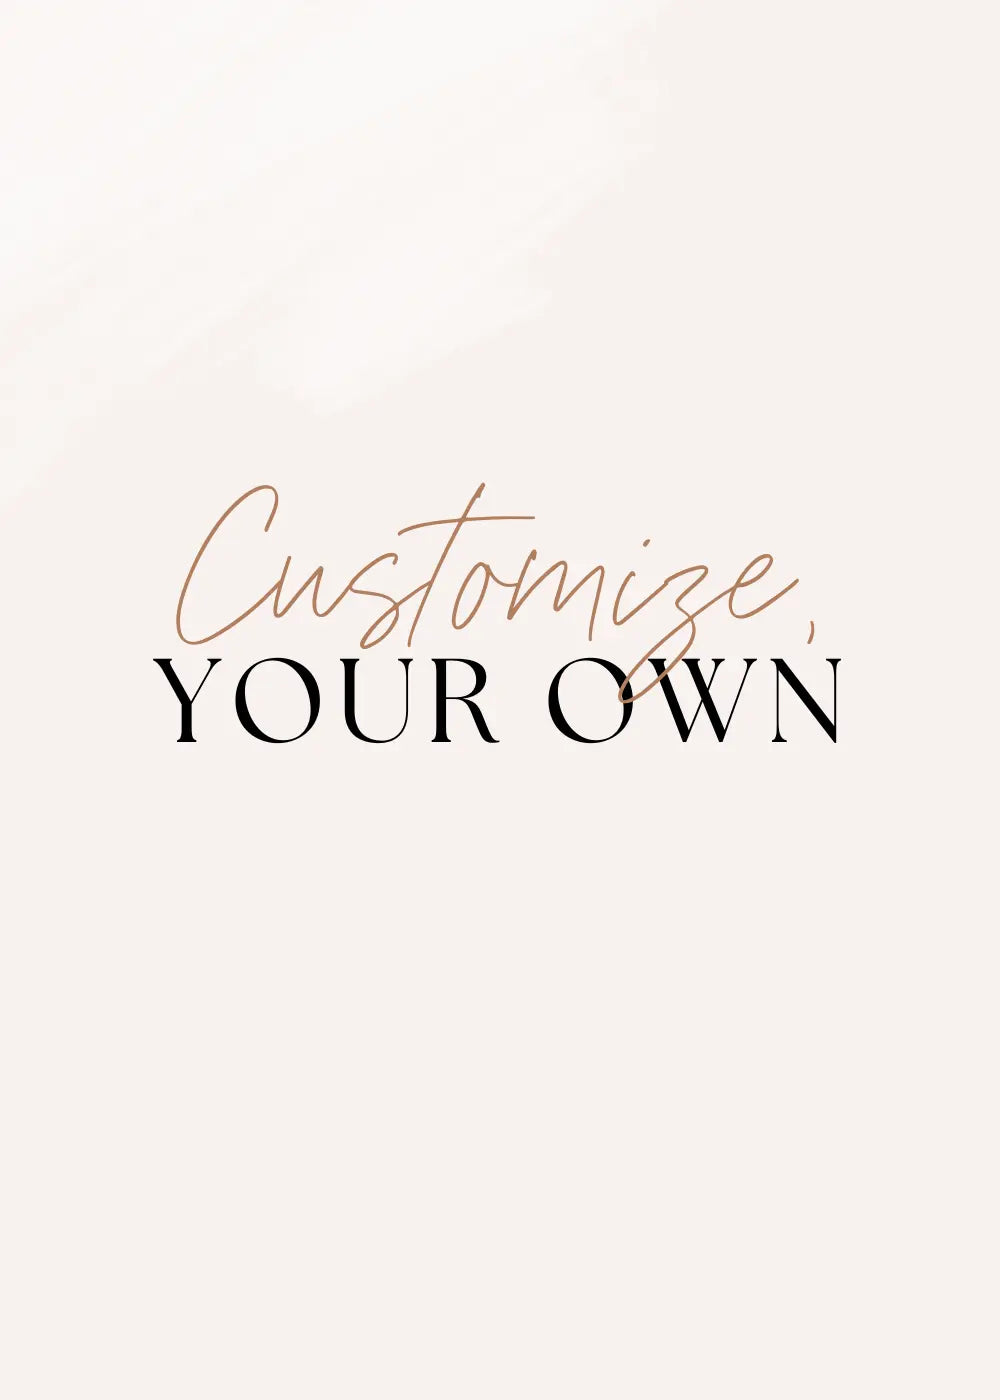 Customize Your own